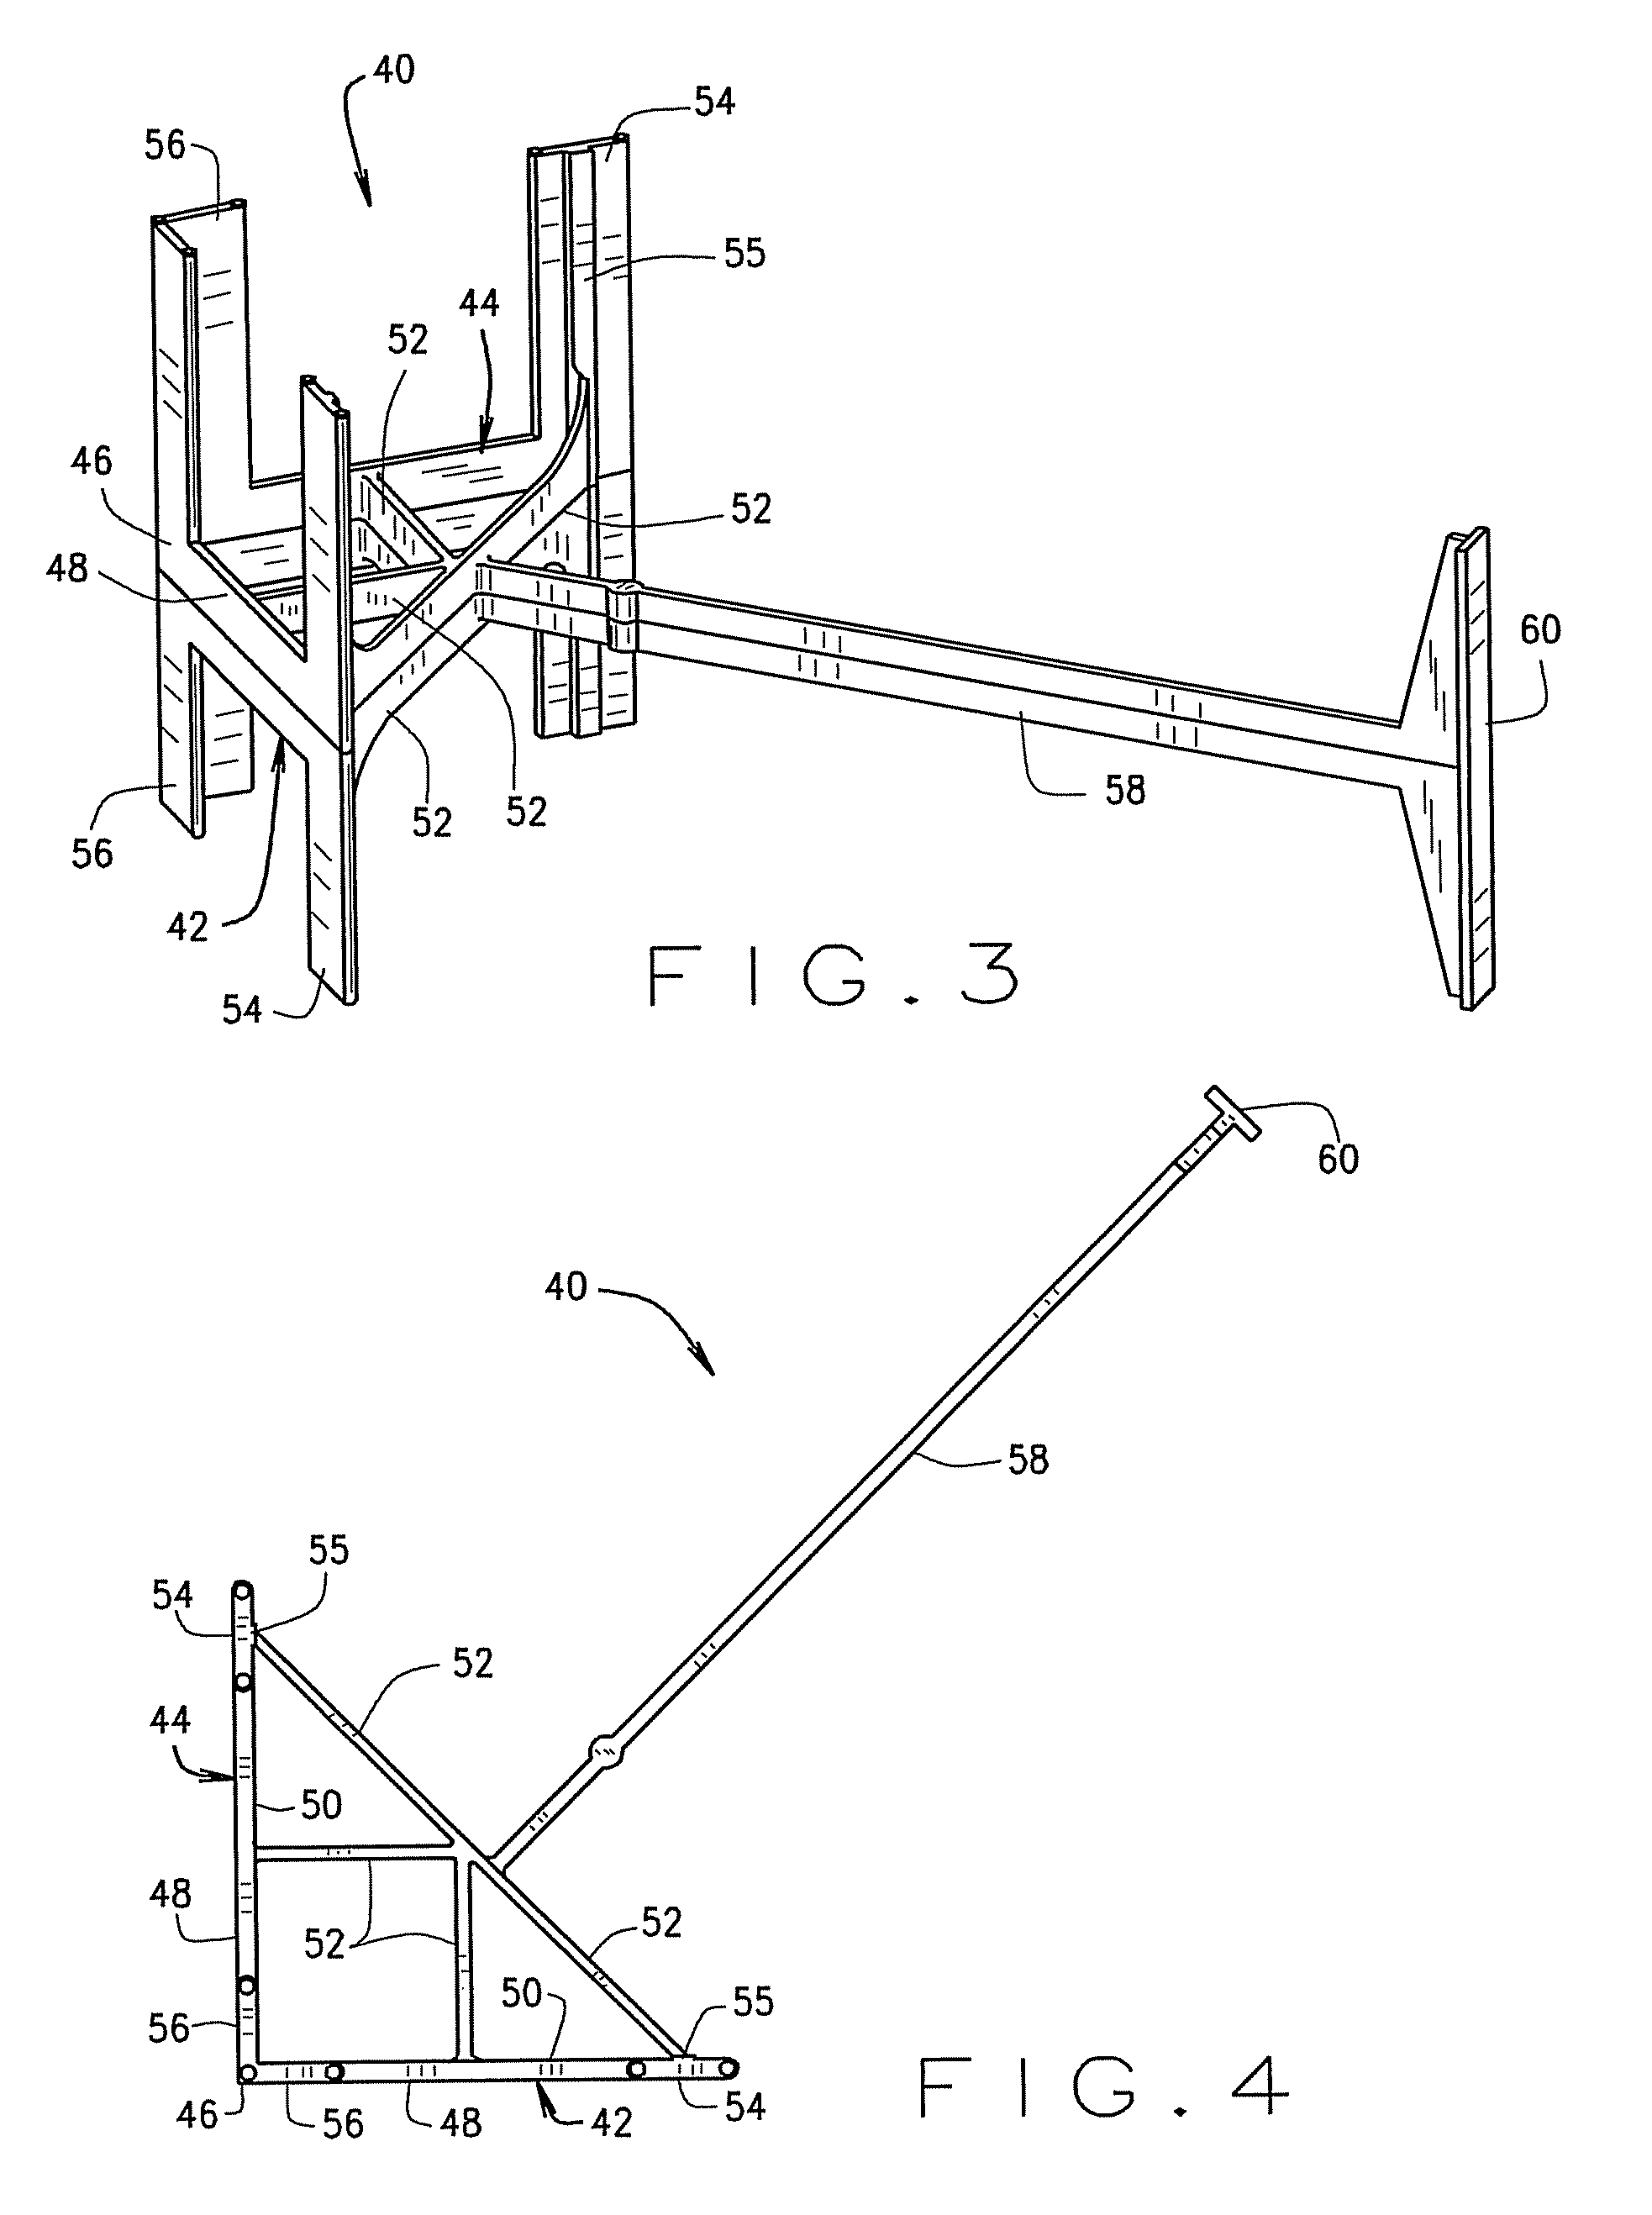 Corner tie bracket for use with insulated concrete form systems